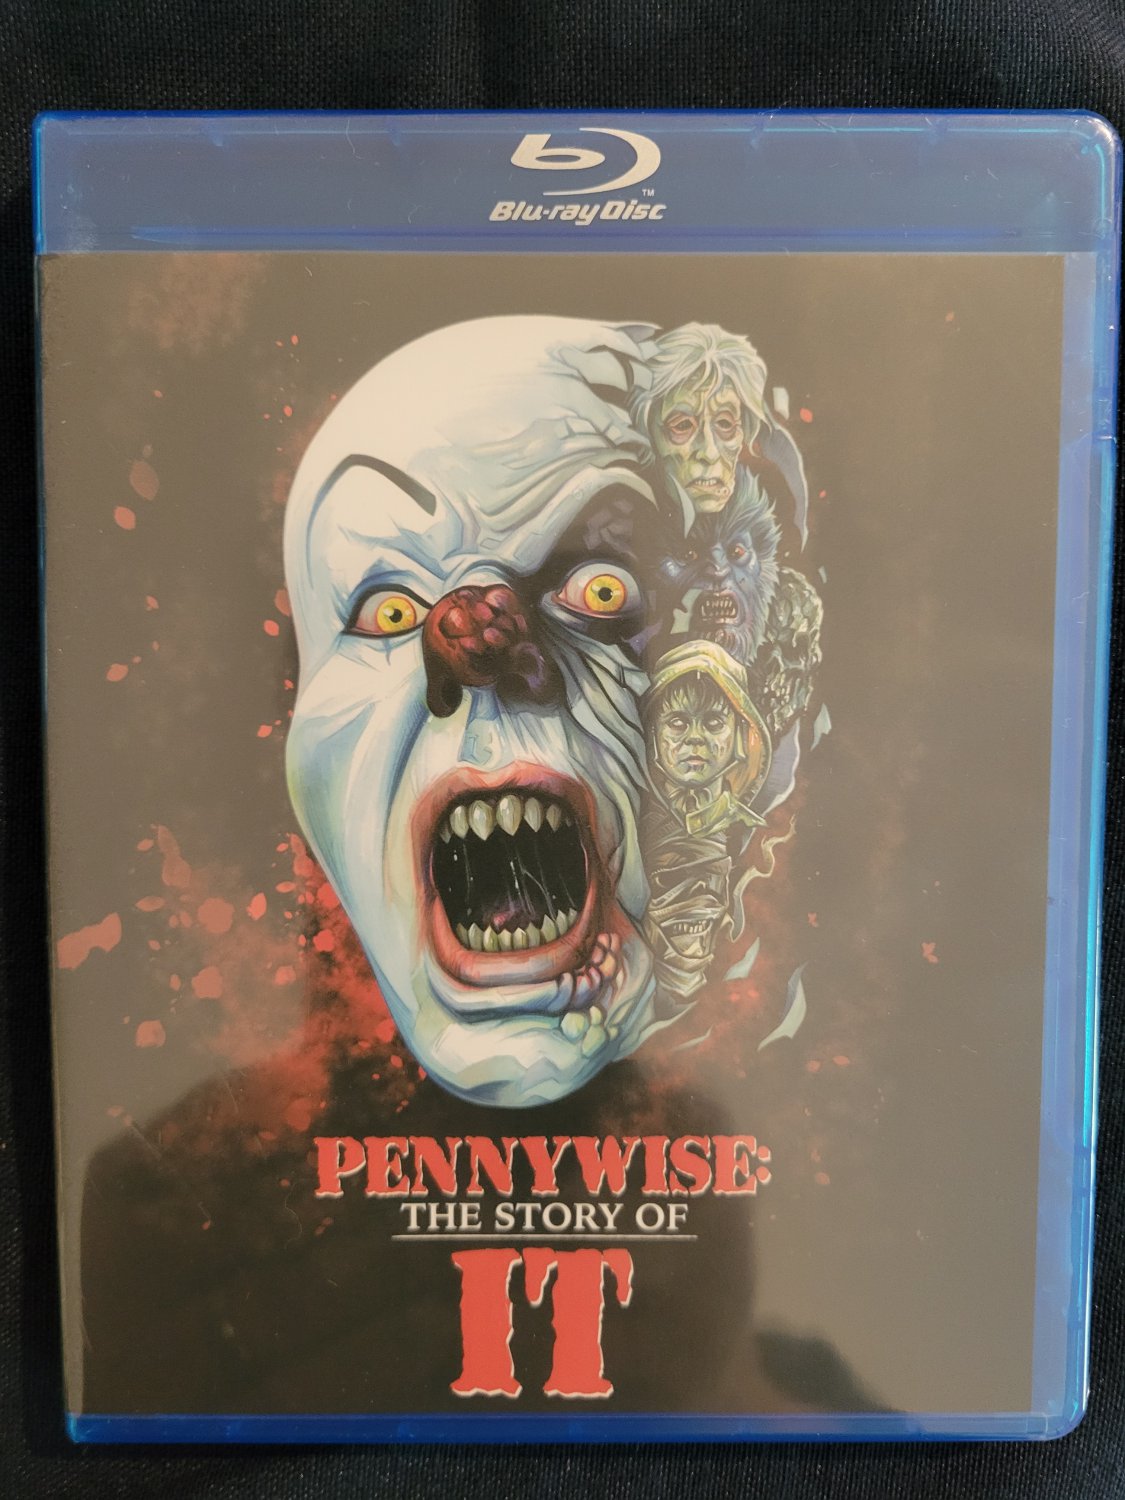 Pennywise: The Story Of IT (Blu-ray) 2021 Documentary